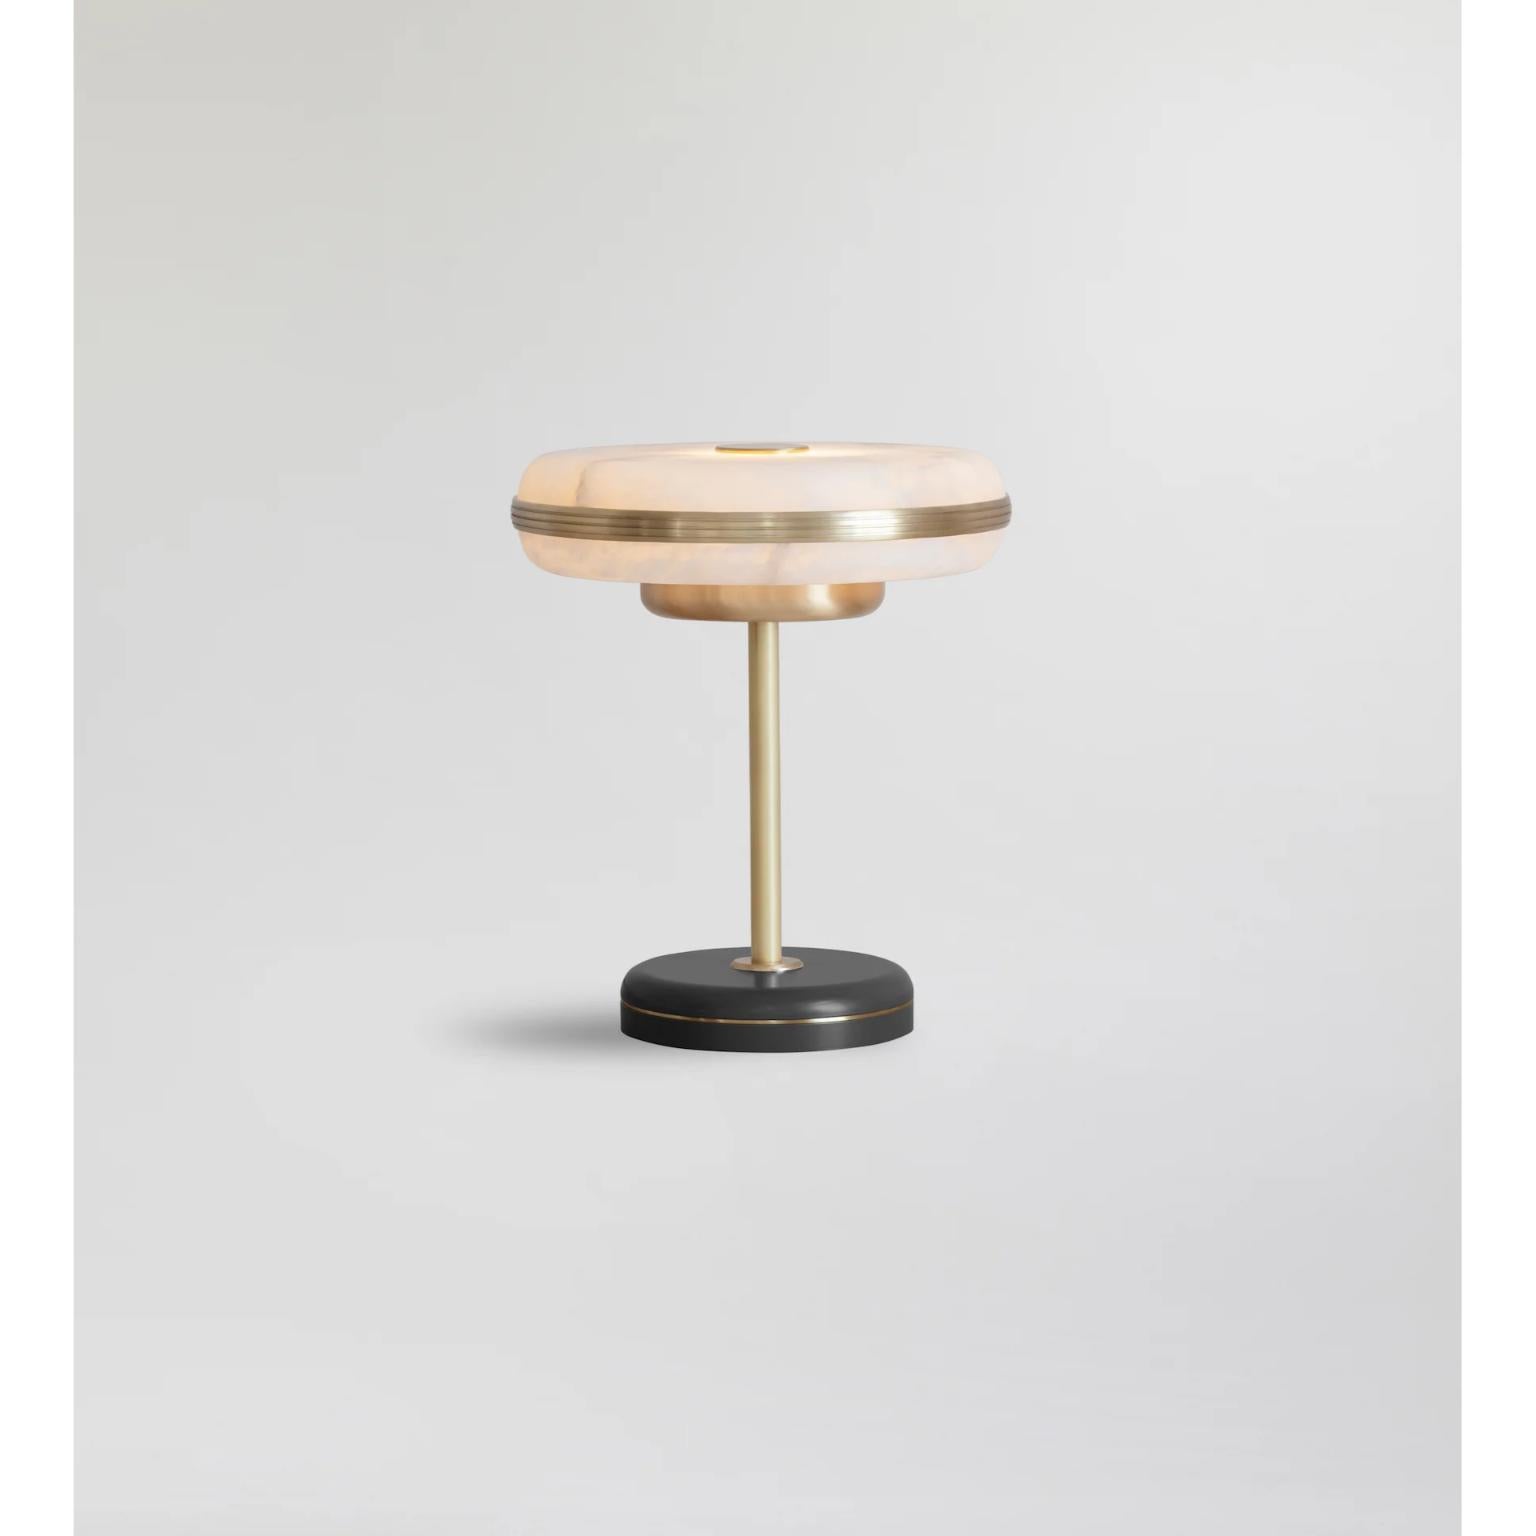 Beran Brushed Brass Small Table Lamp by Bert Frank
Dimensions: Ø 26 x H 28 cm.
Materials: Brass and alabaster.
Base finish: Satin Black.

Available in two different sizes. Available in different finishes and materials. Please contact us. 

The